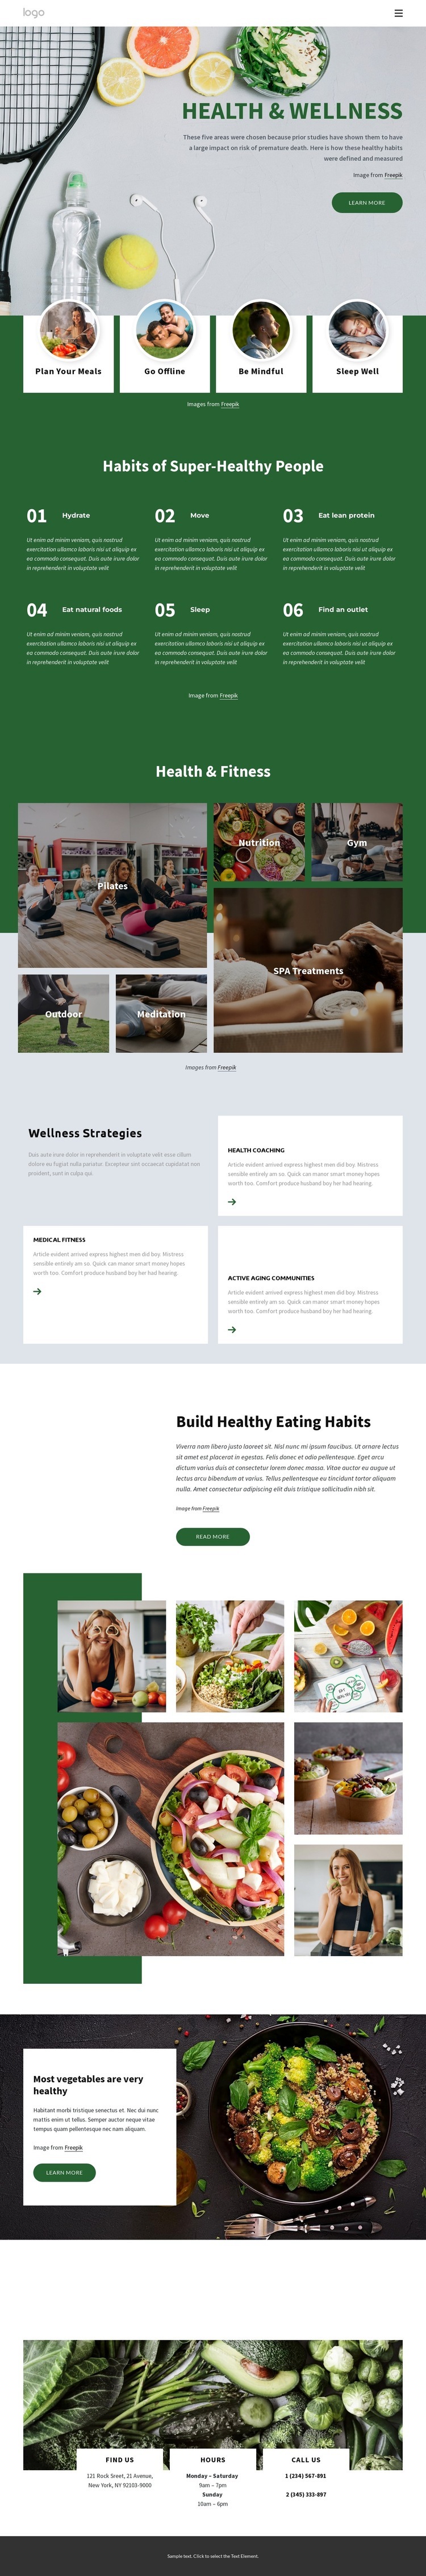 Health and wellness center Web Page Design